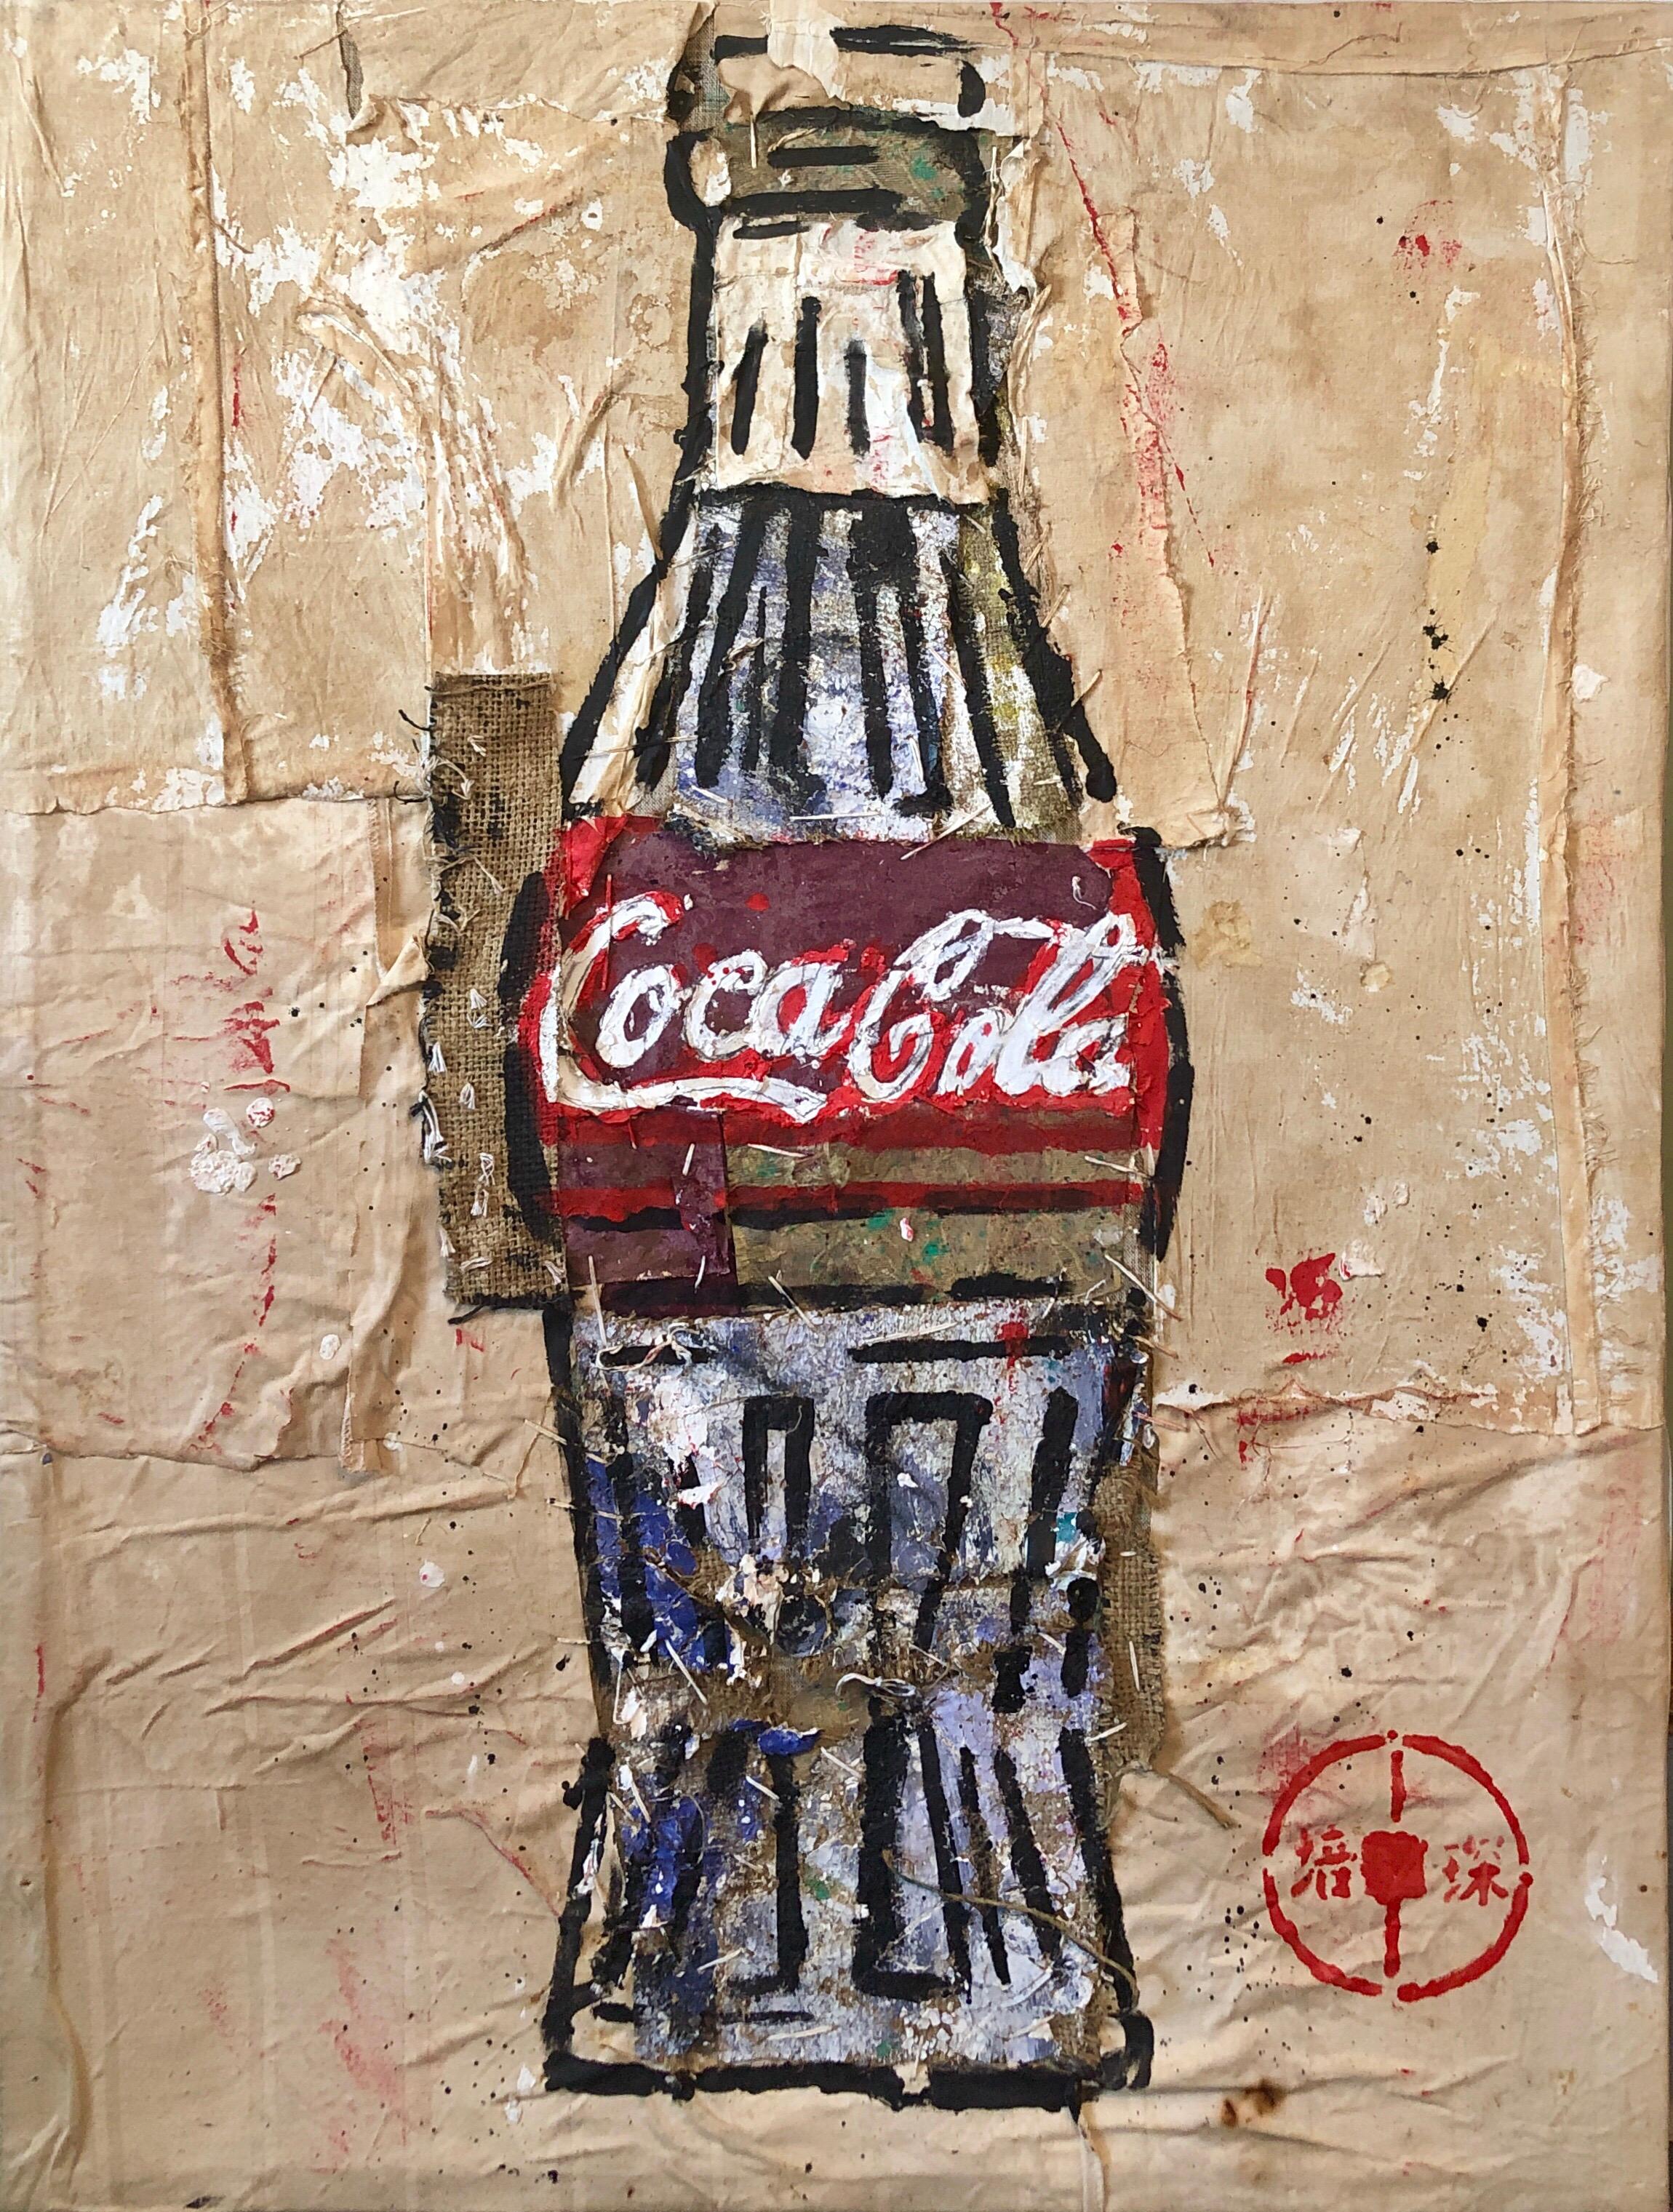 Original Mixed Media Oil Painting Coca Cola Bottle Notorious Chinese Art Forger - Mixed Media Art by Pei Shen Qian